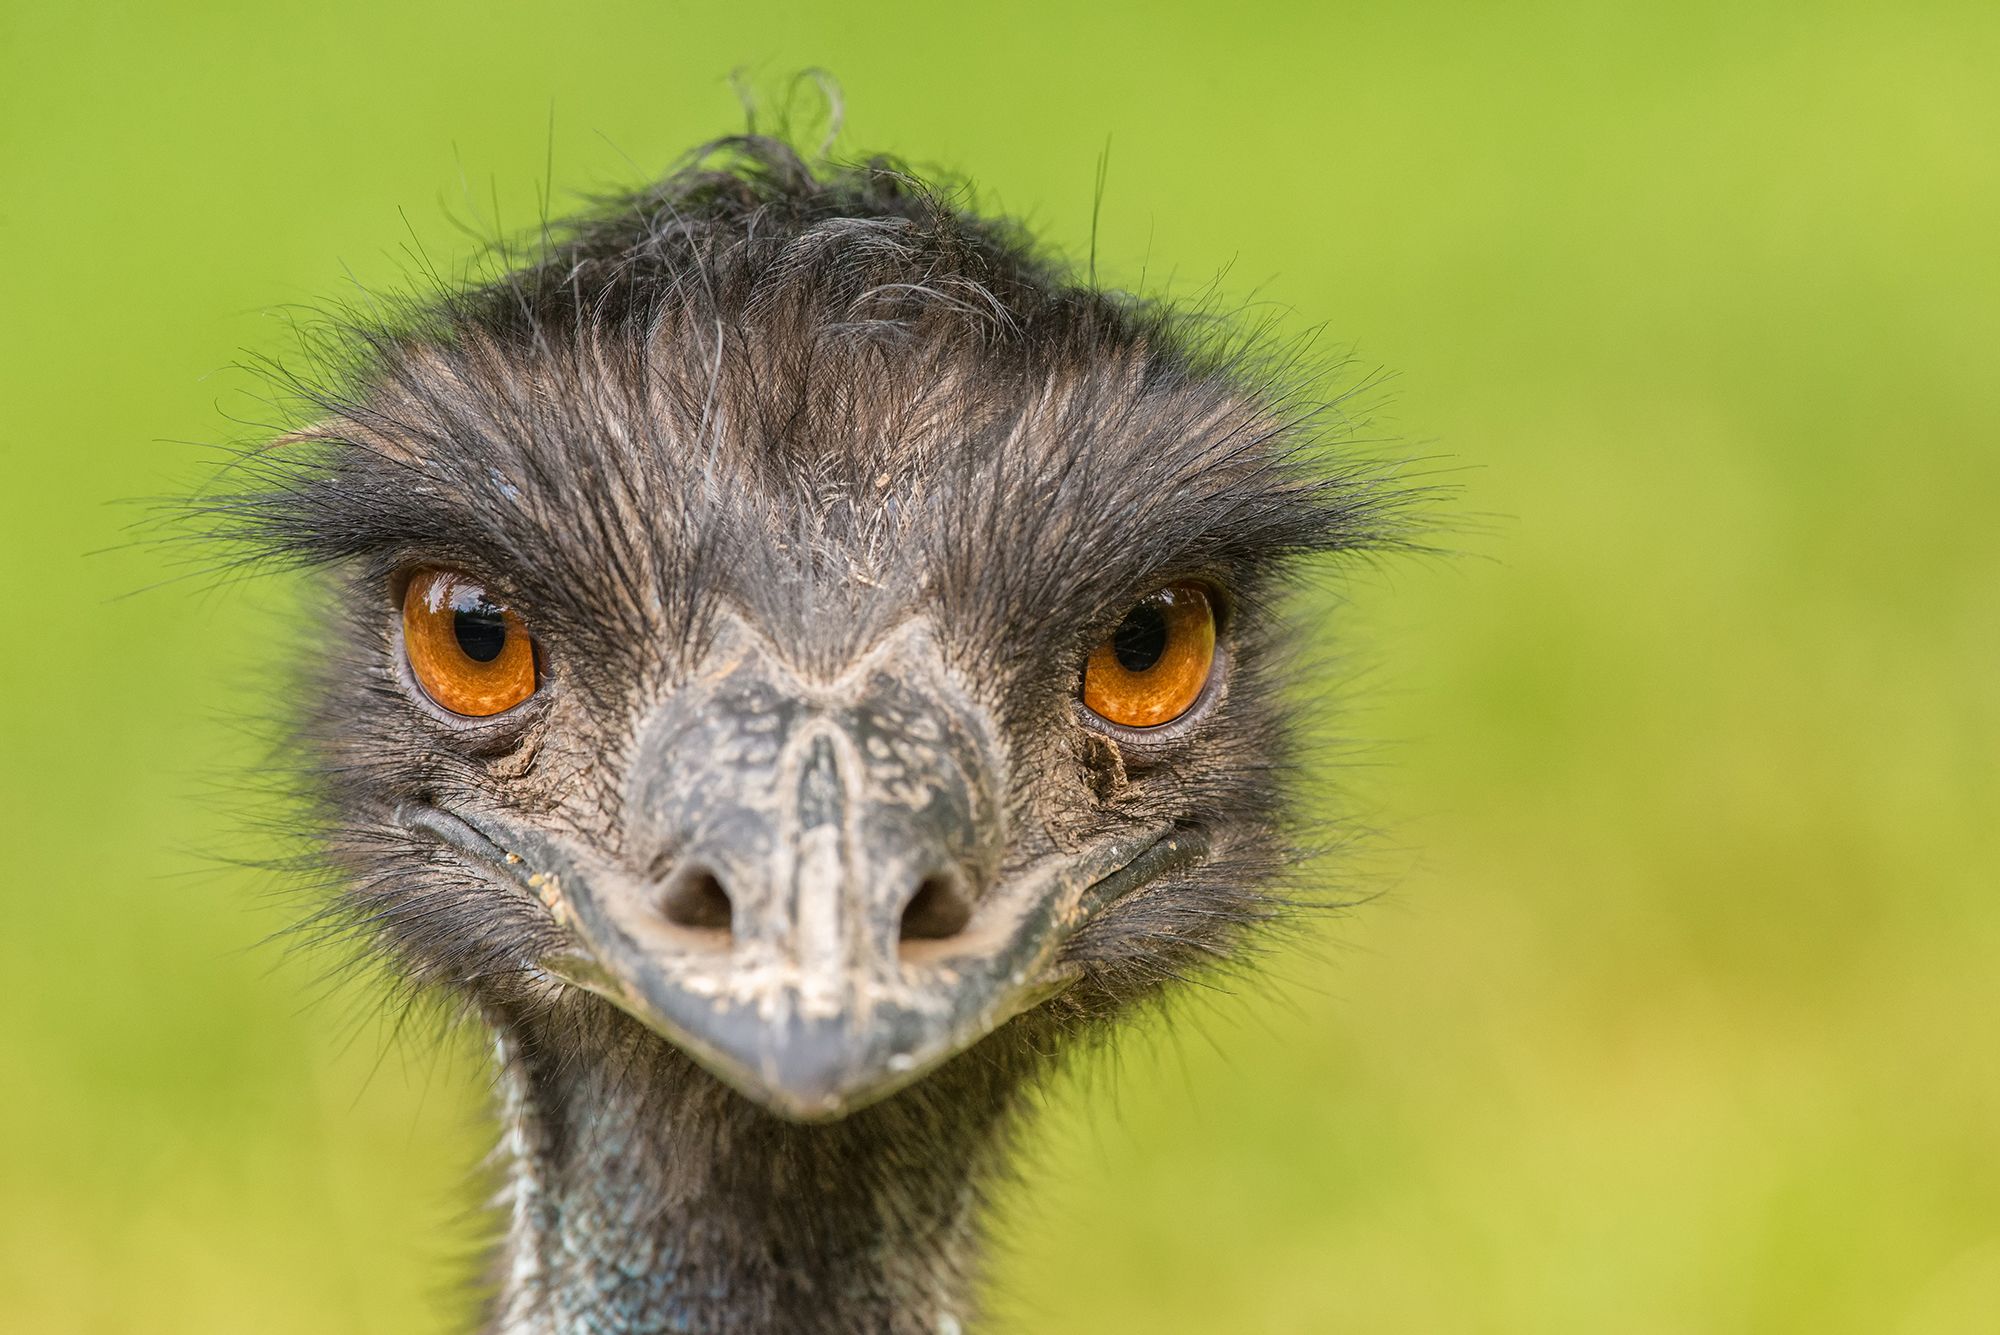 nul horizon Evacuatie The Australian town of Nannup has been invaded by emus | CNN